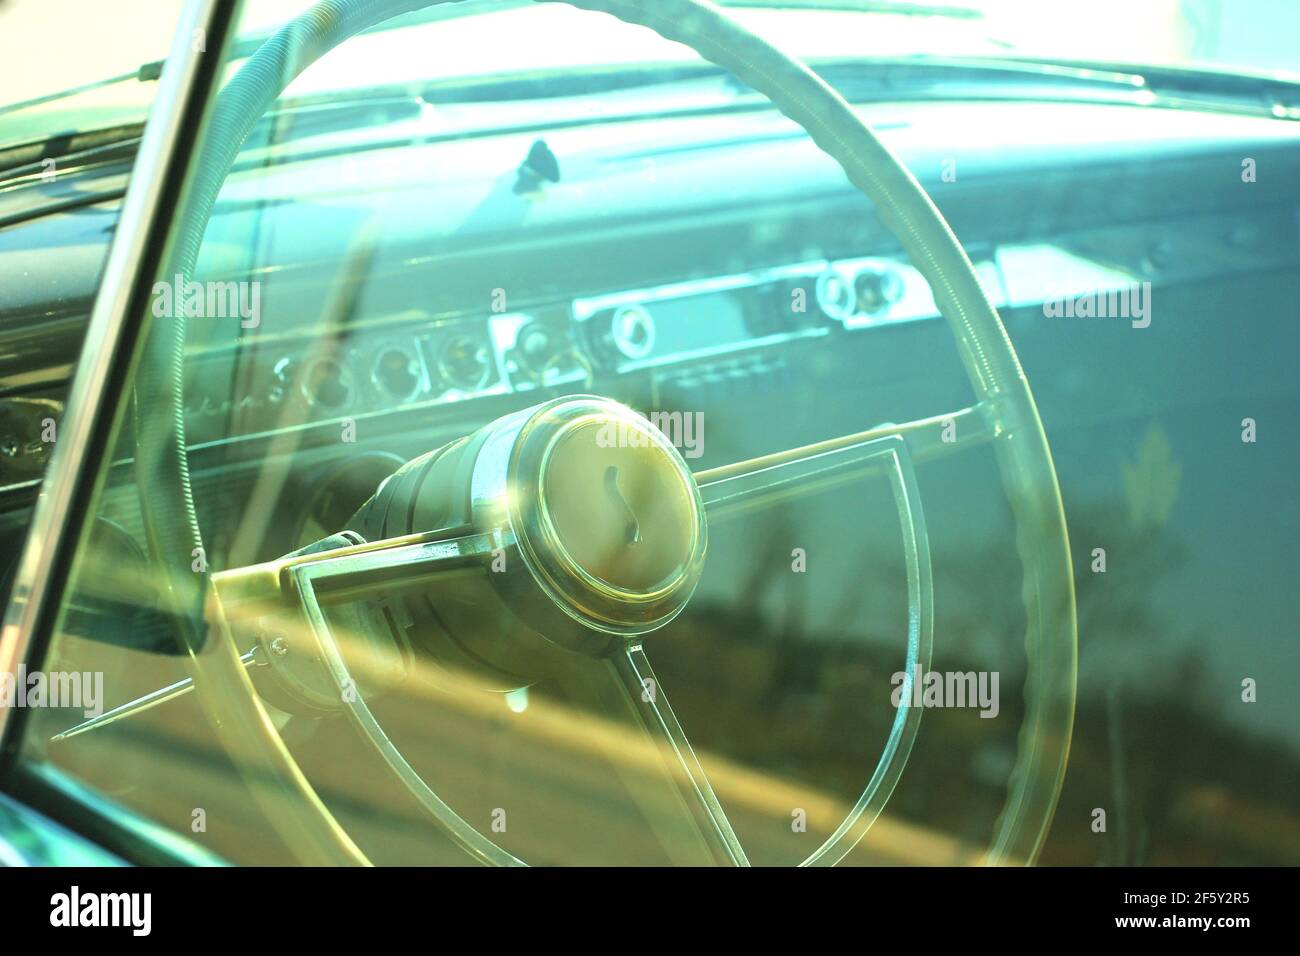 Classic Car Automobile Interior with Steering wheel and dashboard Stock Photo